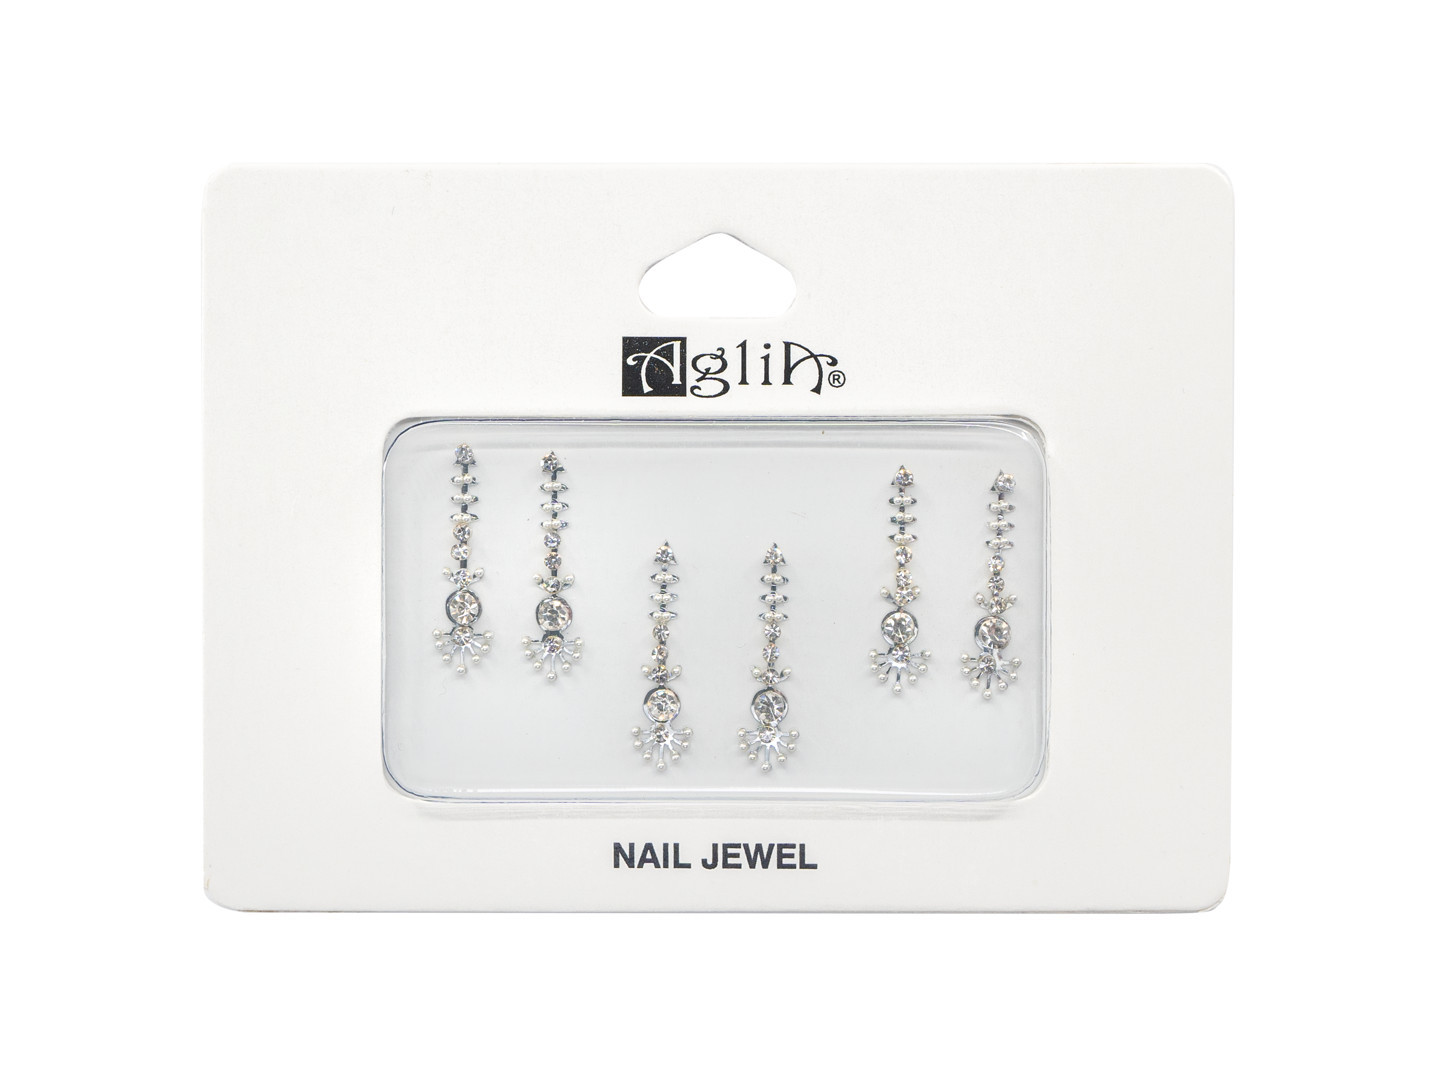 9. Chic Nail Jewel Designs - wide 5